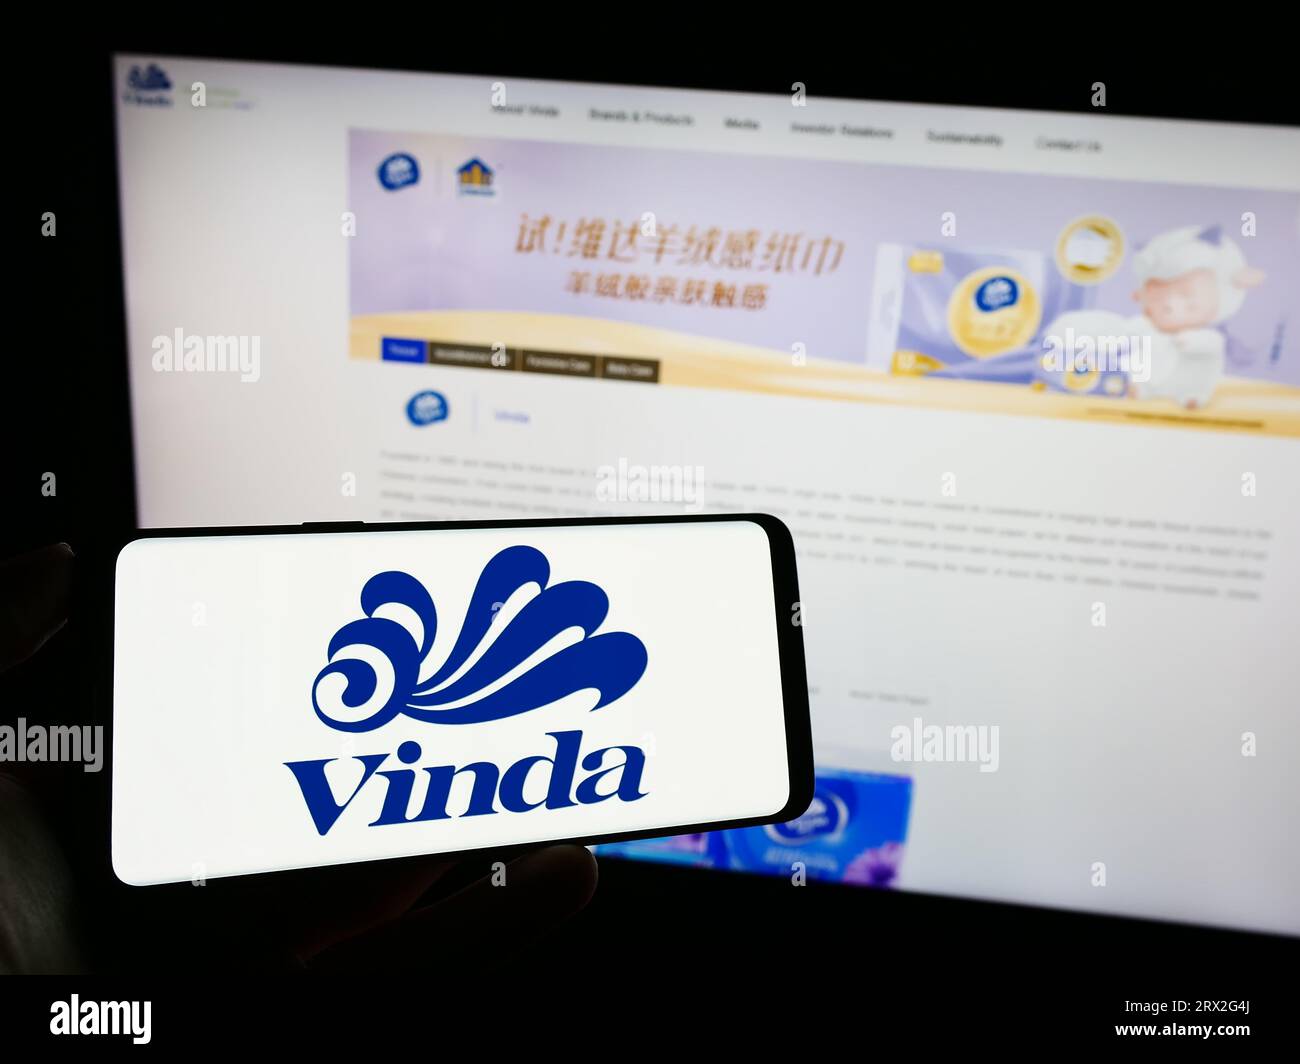 Person holding mobile phone with logo of company Vinda International Holdings Limited on screen in front of web page. Focus on phone display. Stock Photo